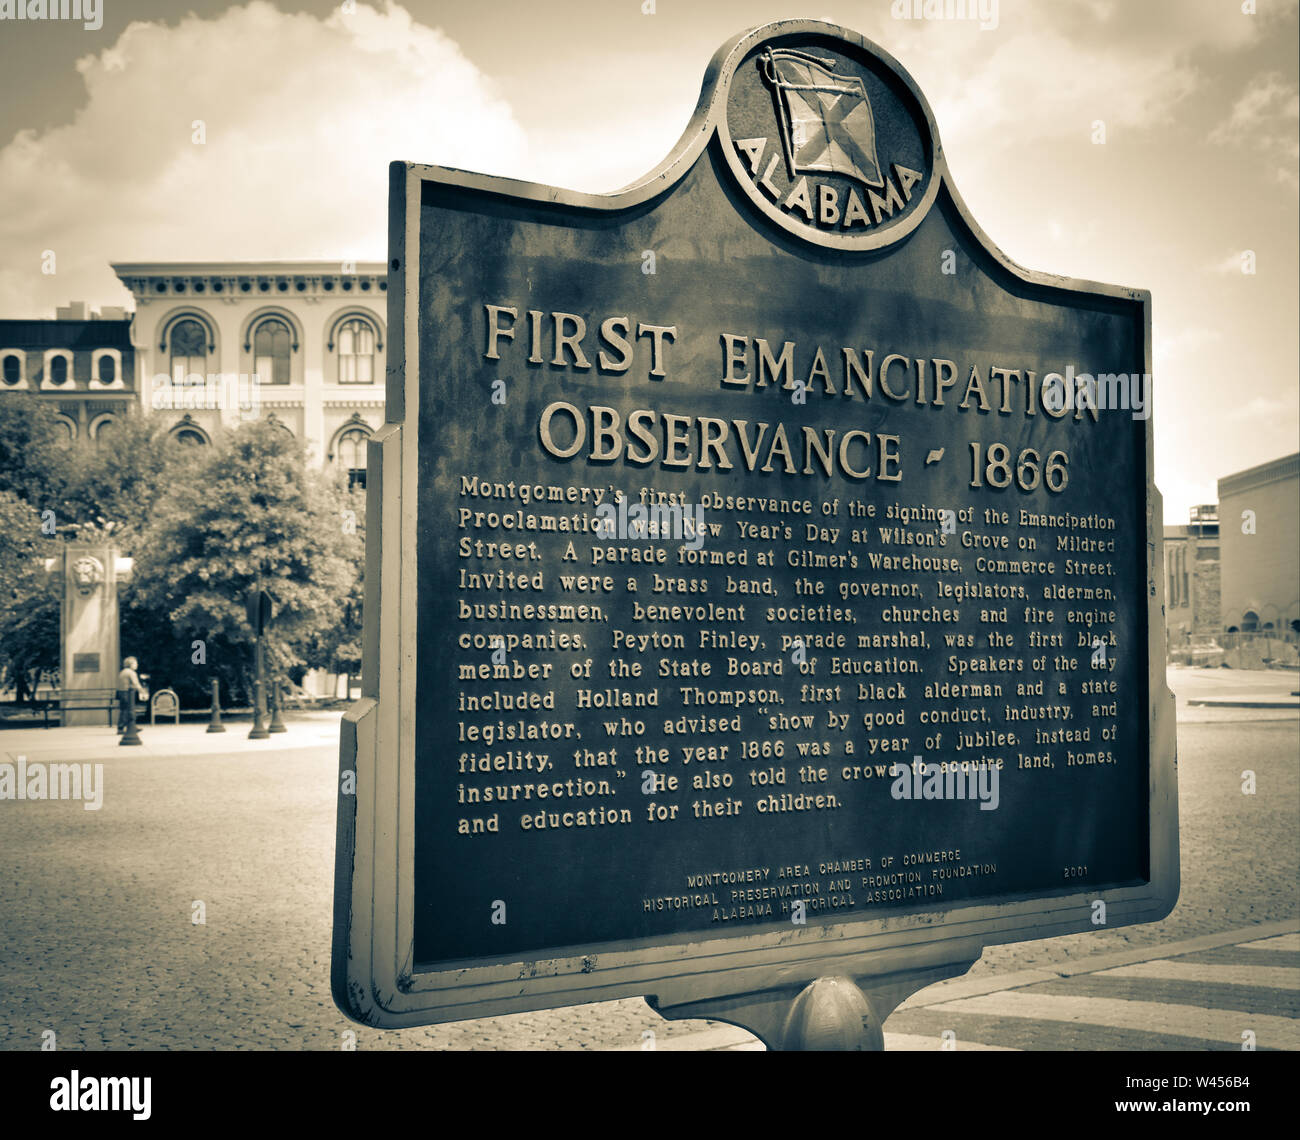 An historical marker commemorating the First Emancipation Observance of 1866 by former slaves, in Montgomery, AL, USA, in sepia Stock Photo